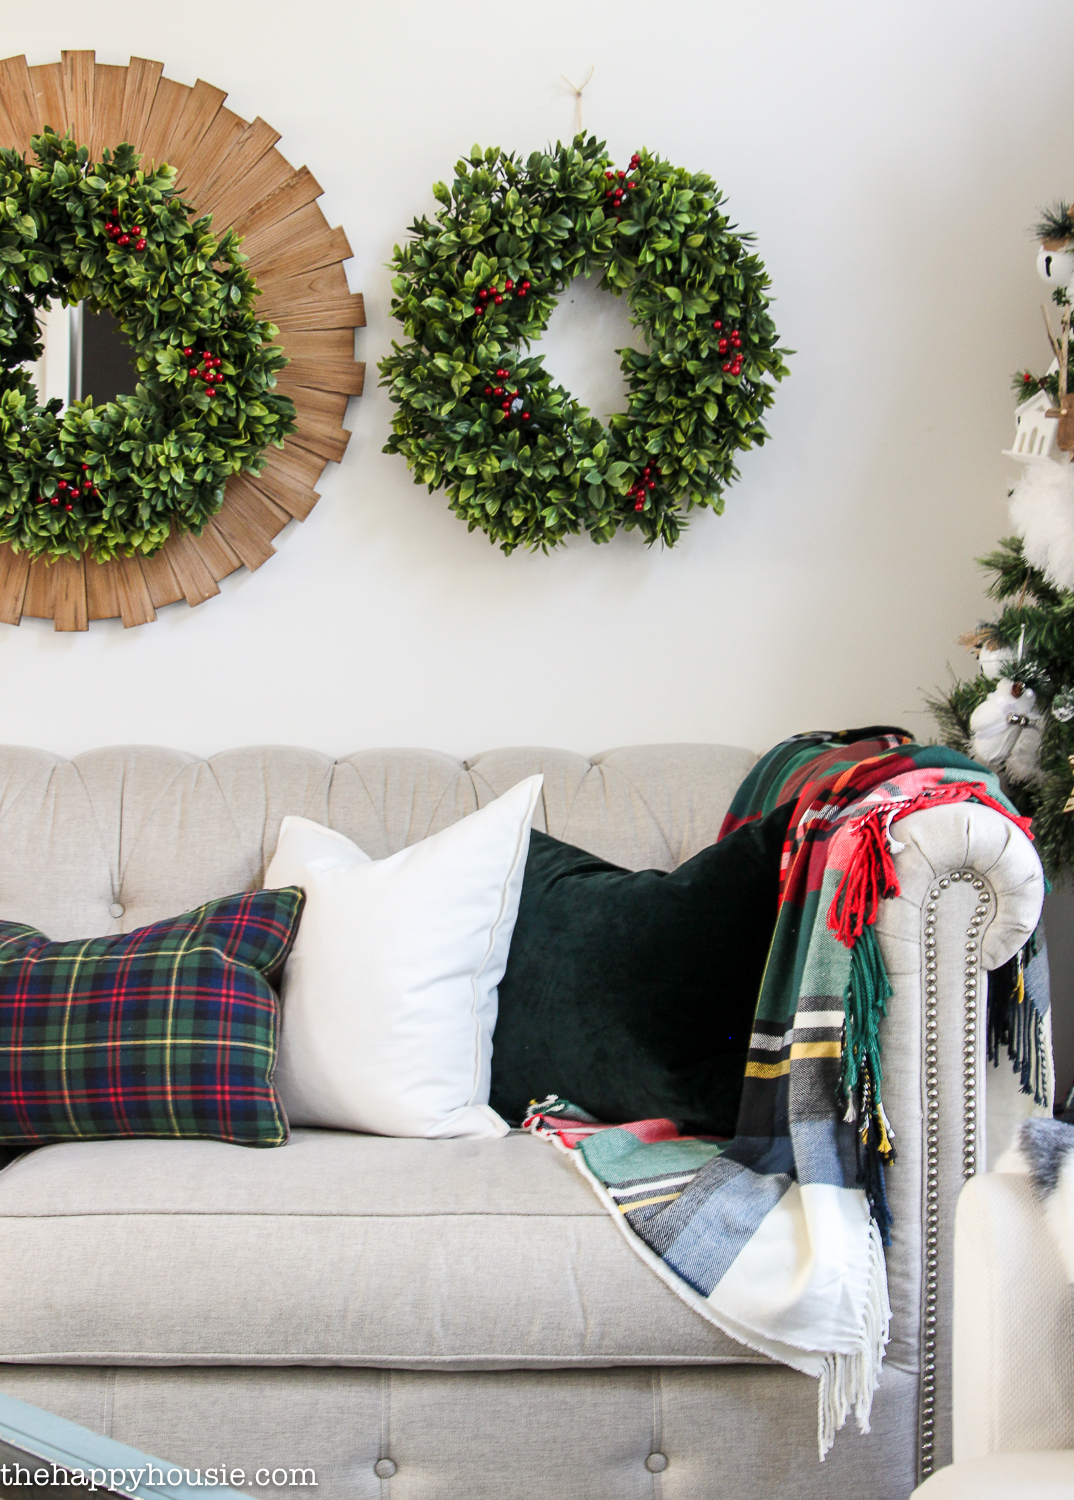 Wreaths are hanging above the couch.